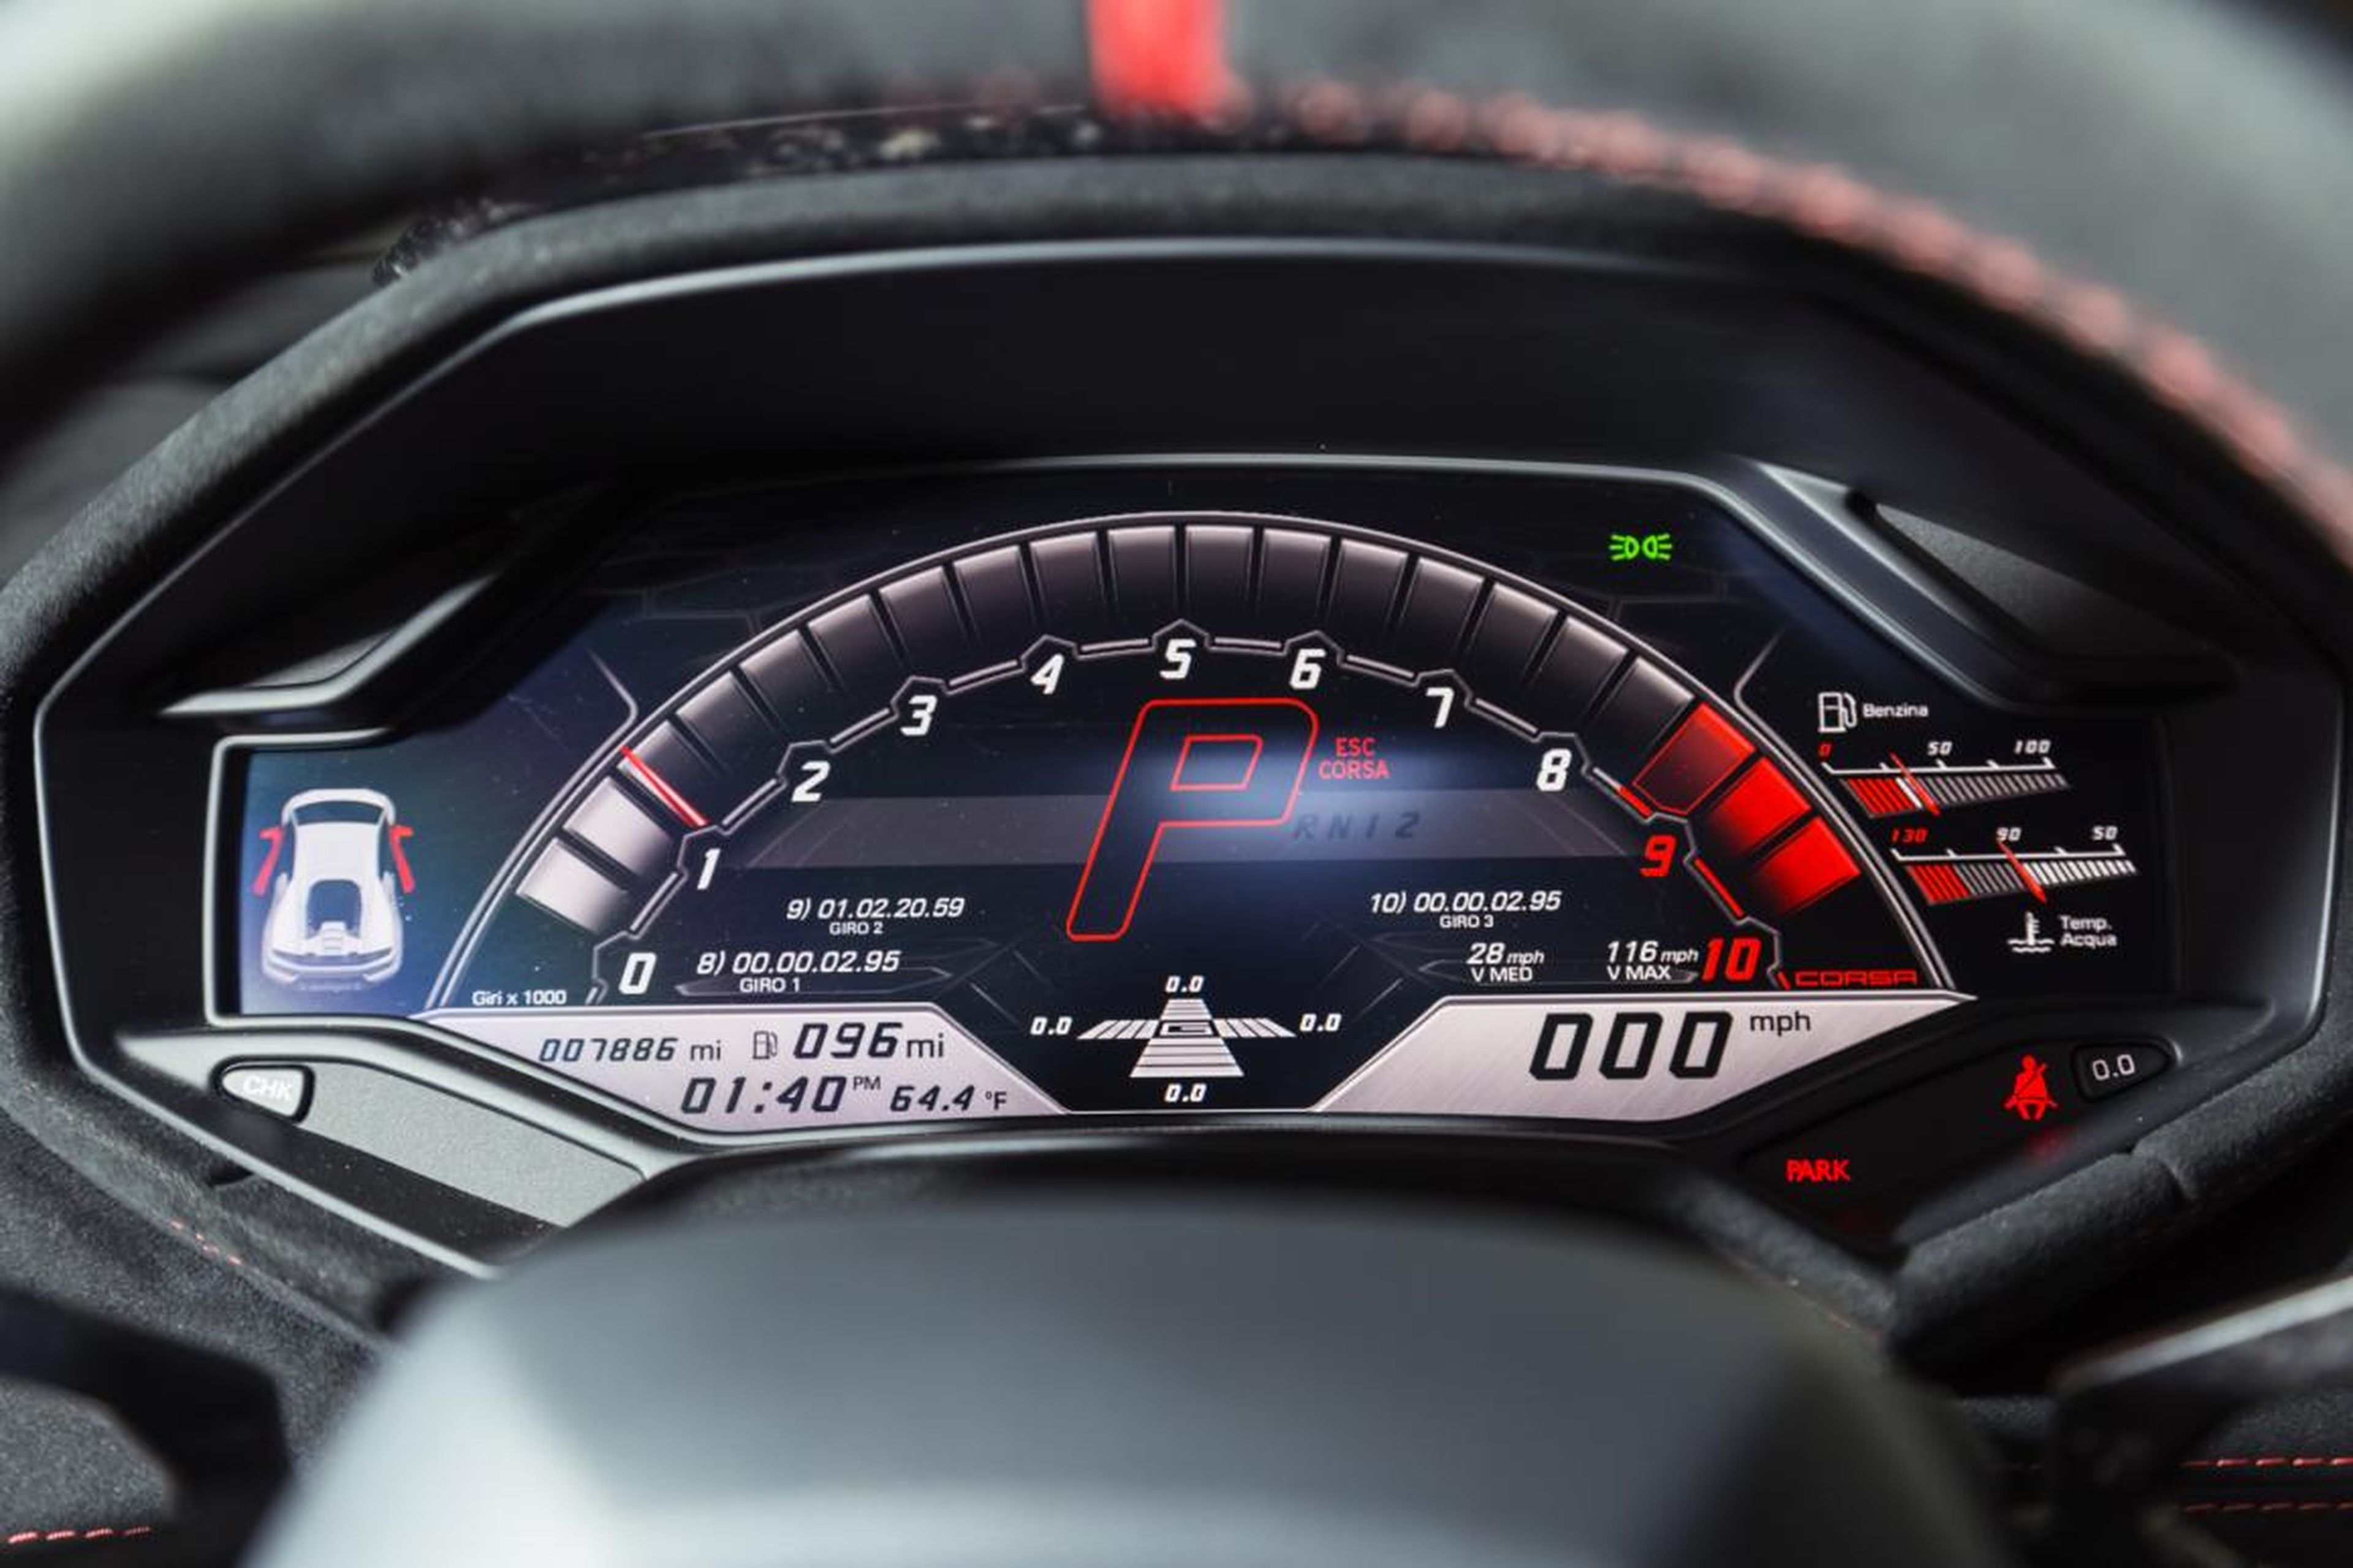 Corsa transforms the instrument cluster into a track-oriented information-crammed screen that's dominated by a digital tachometer.